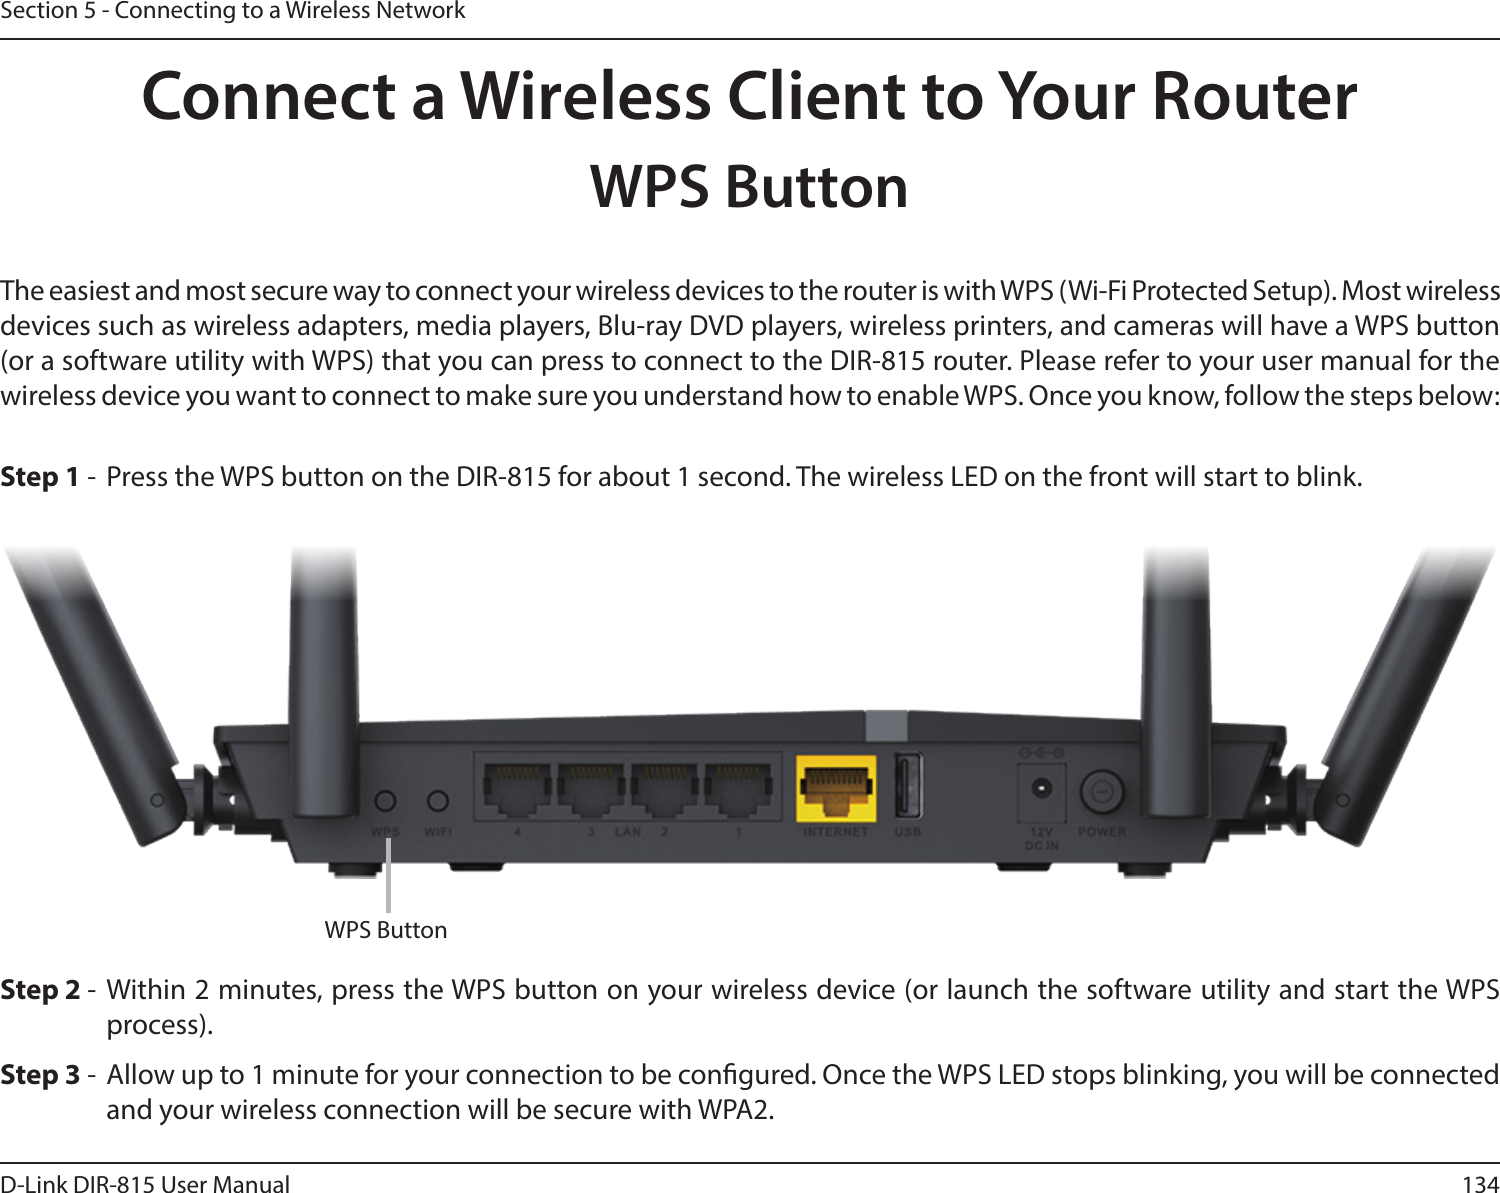 134D-Link DIR-815 User ManualSection 5 - Connecting to a Wireless NetworkConnect a Wireless Client to Your RouterWPS ButtonStep 2 - Within 2 minutes, press the WPS button on your wireless device (or launch the software utility and start the WPS process).The easiest and most secure way to connect your wireless devices to the router is with WPS (Wi-Fi Protected Setup). Most wireless devices such as wireless adapters, media players, Blu-ray DVD players, wireless printers, and cameras will have a WPS button (or a software utility with WPS) that you can press to connect to the DIR-815 router. Please refer to your user manual for the wireless device you want to connect to make sure you understand how to enable WPS. Once you know, follow the steps below:Step 1 -  Press the WPS button on the DIR-815 for about 1 second. The wireless LED on the front will start to blink.Step 3 -  Allow up to 1 minute for your connection to be congured. Once the WPS LED stops blinking, you will be connected and your wireless connection will be secure with WPA2.WPS Button